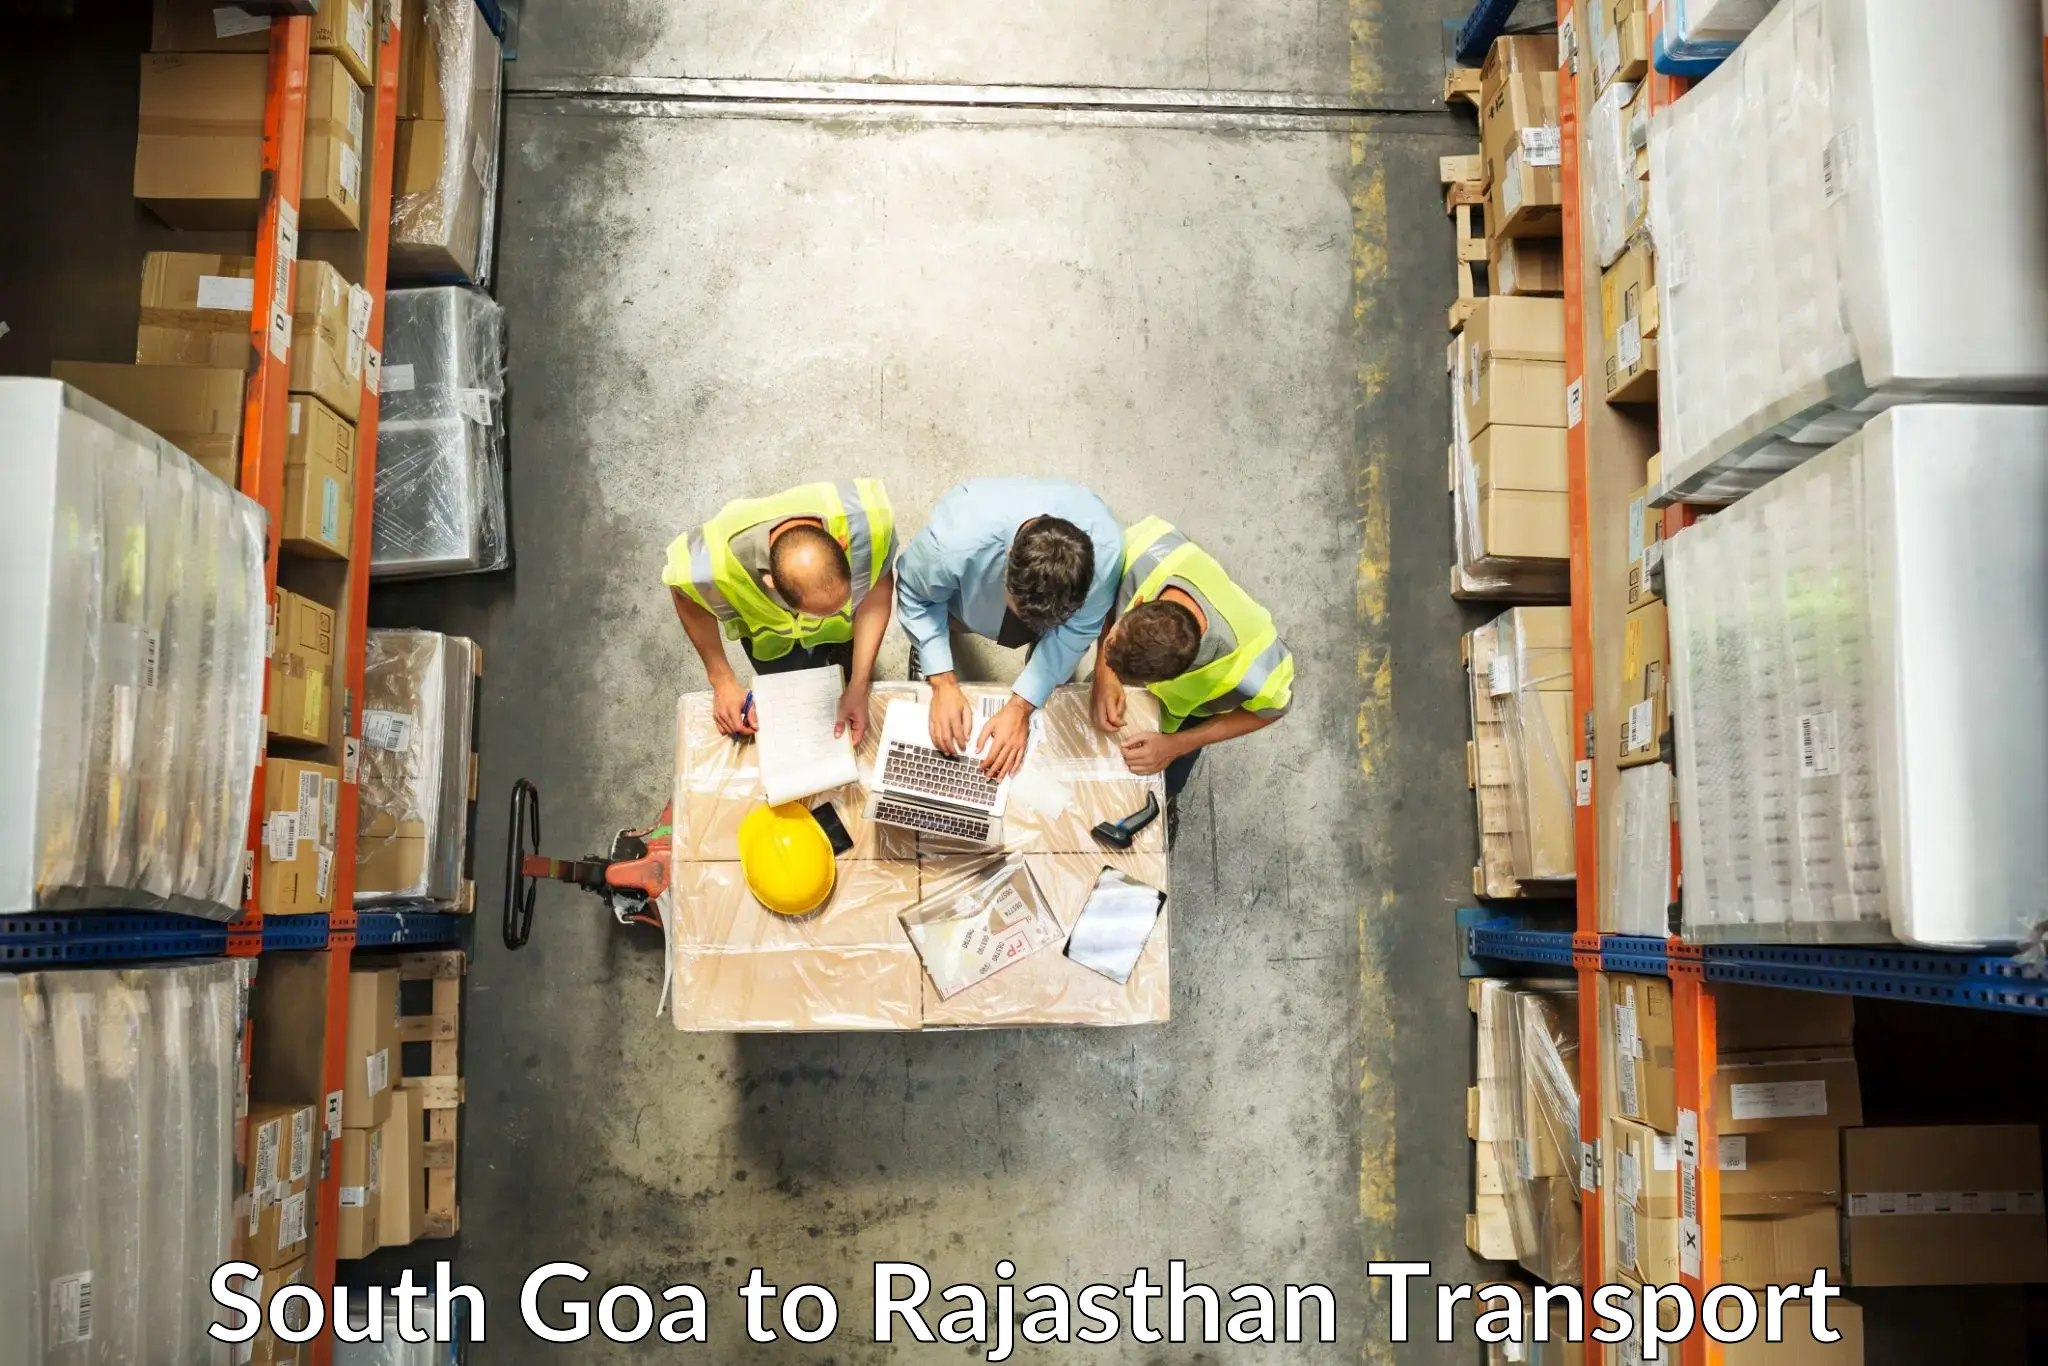 Part load transport service in India South Goa to Khinwara